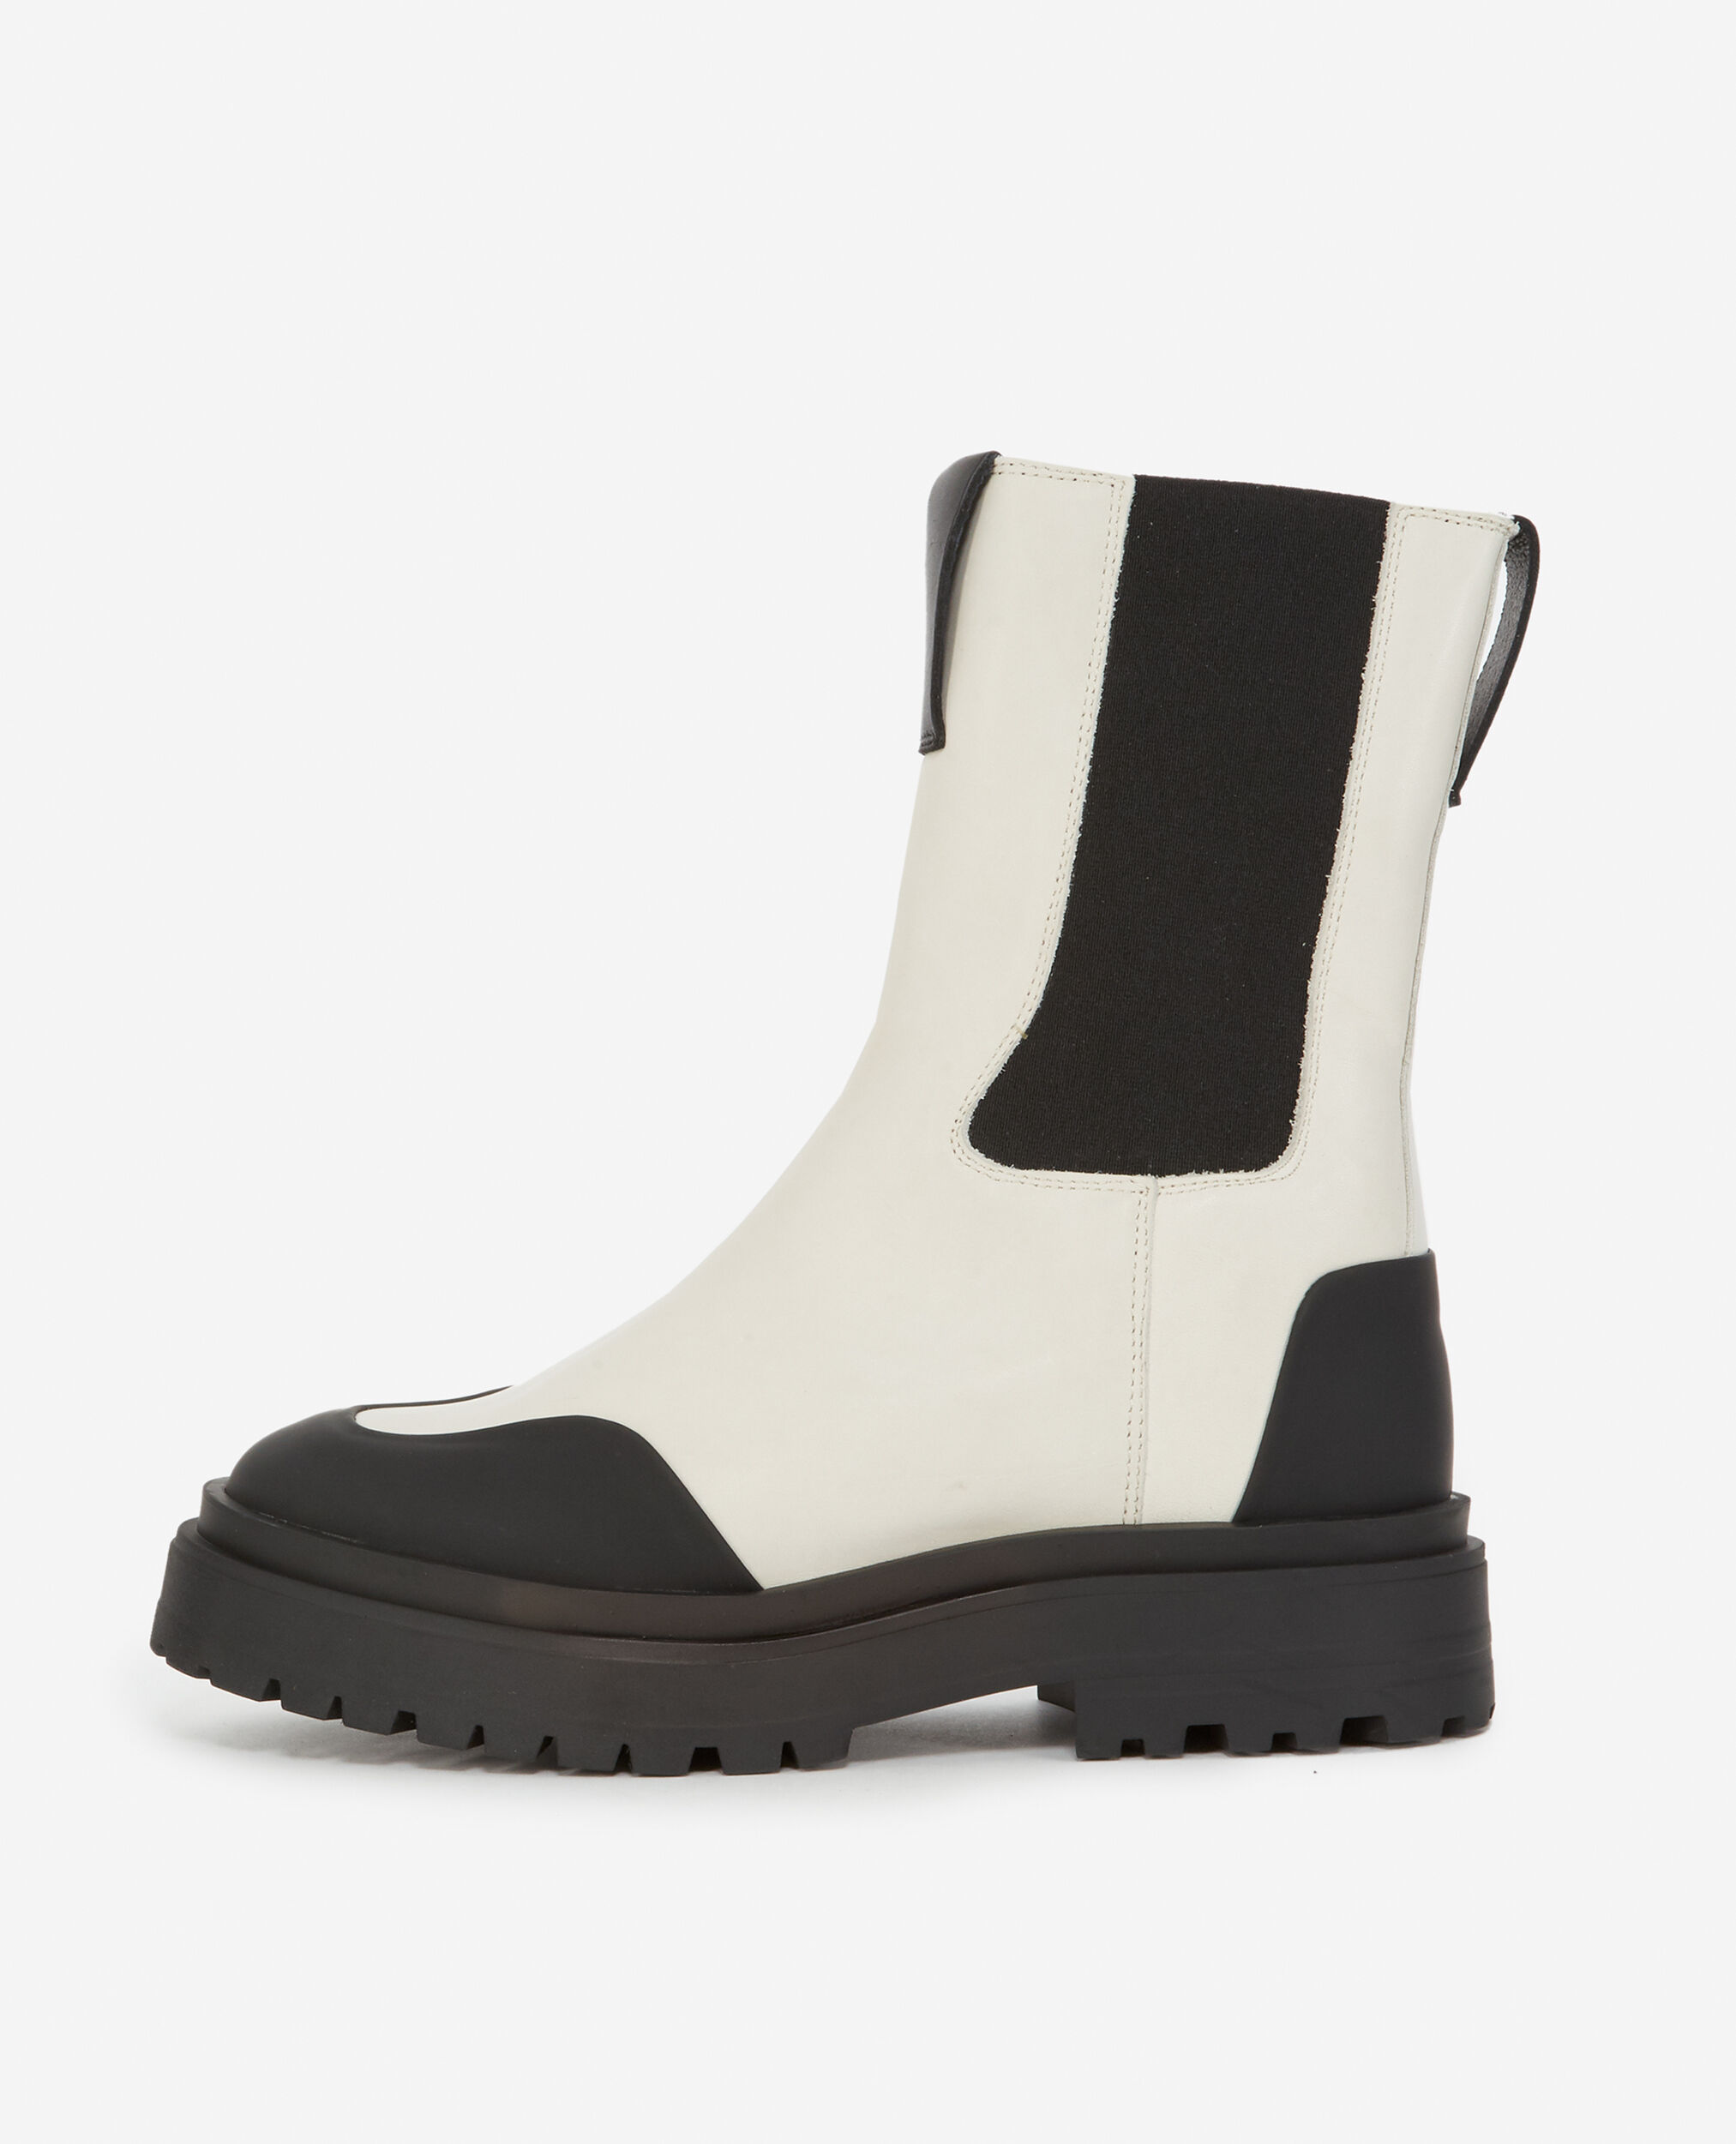 Ecru leather Chelsea boots with logo, ECRU, hi-res image number null